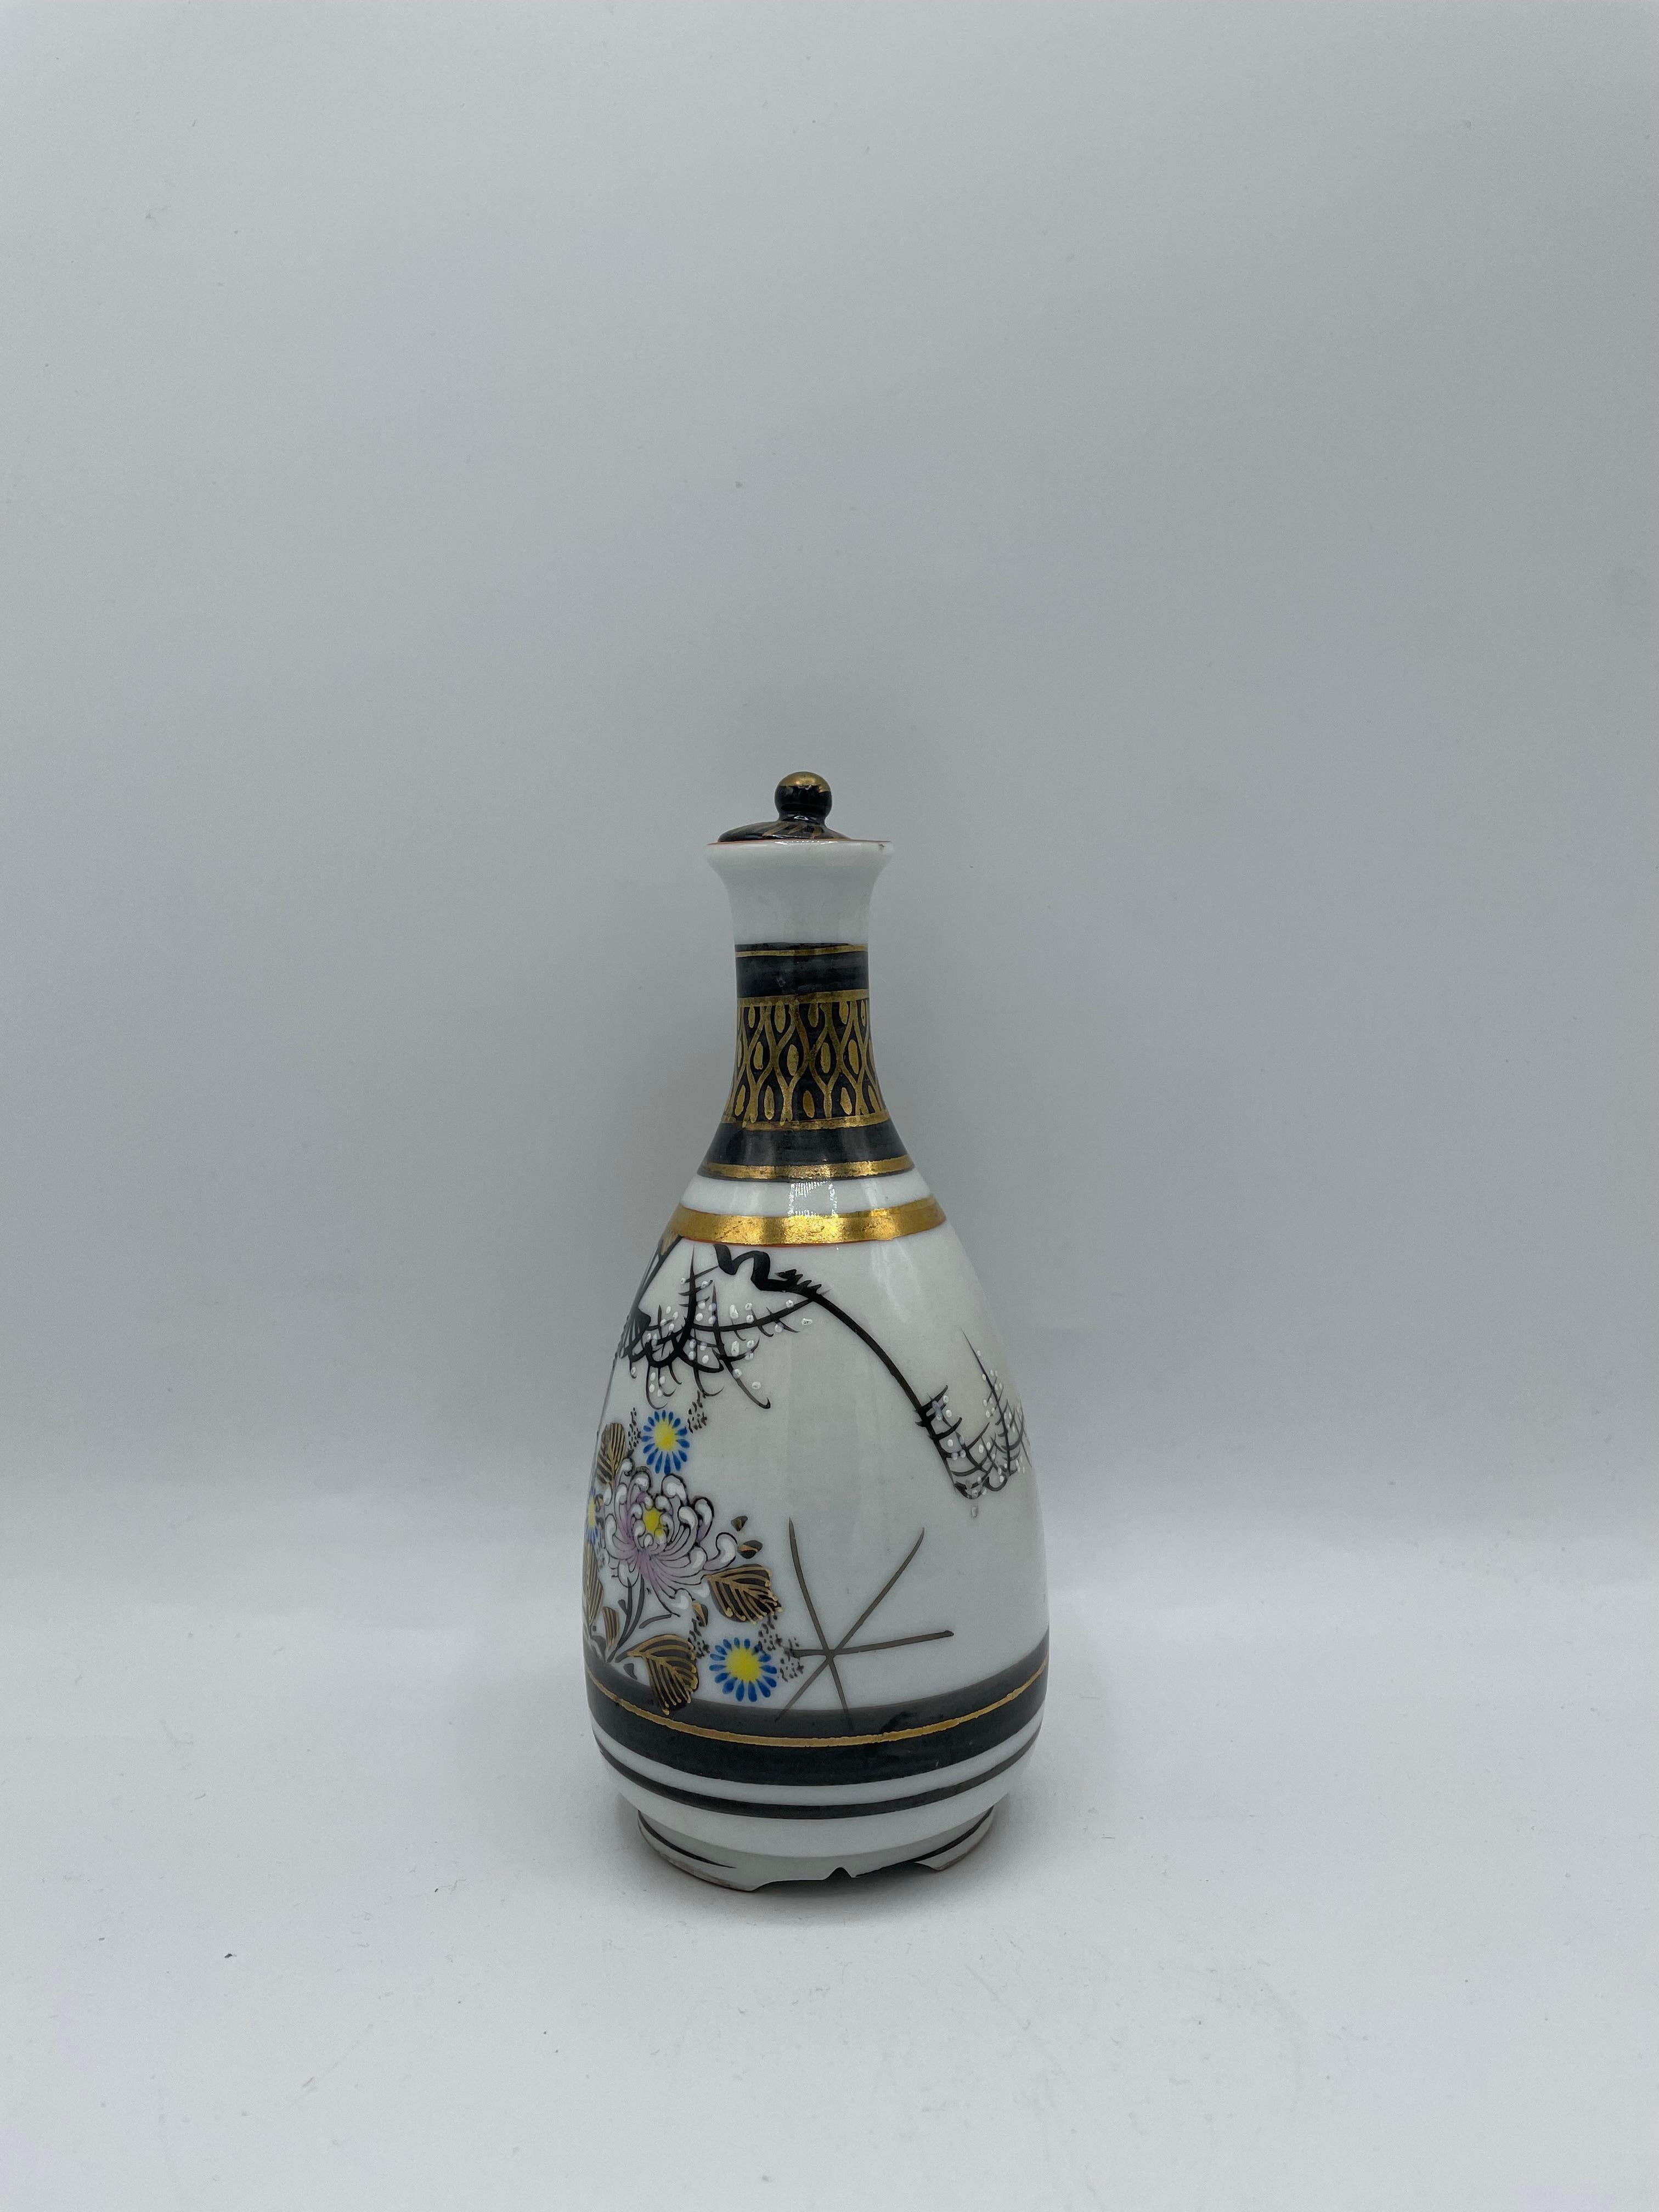 This is a sake bottle which is called 'tokkuri' in Japanese.
This tokkuri is made with porcelain and it is hand painted.
It was made in Showa era around 1970s.
The design is the landscape of Japanese fan and flowers.
This tokkuri will come with a